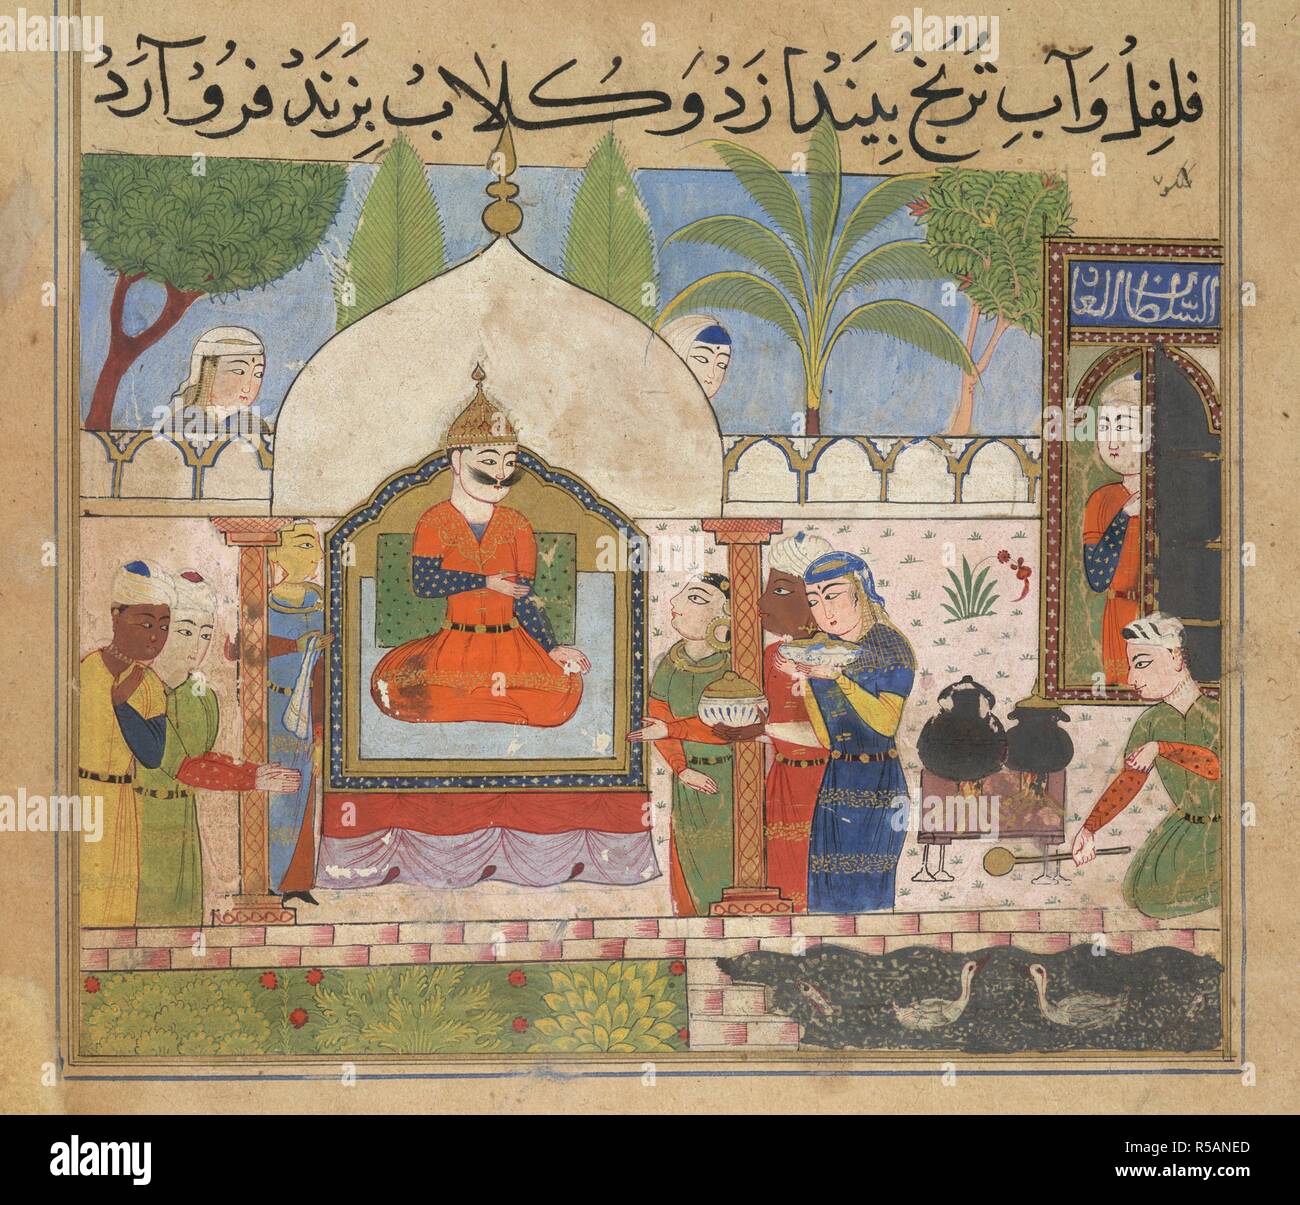 Soup being prepared. The Ni'matnama-i Nasir al-Din Shah. A manuscript o. 1495 - 1505. Soup being prepared for the Sultan Ghiyath al-Din. Opaque watercolour. Sultanate style.  Image taken from The Ni'matnama-i Nasir al-Din Shah. A manuscript on Indian cookery and the preparation of sweetmeats, spices etc.  Originally published/produced in 1495 - 1505. . Source: I.O. ISLAMIC 149, f.35v. Language: Persian. Stock Photo